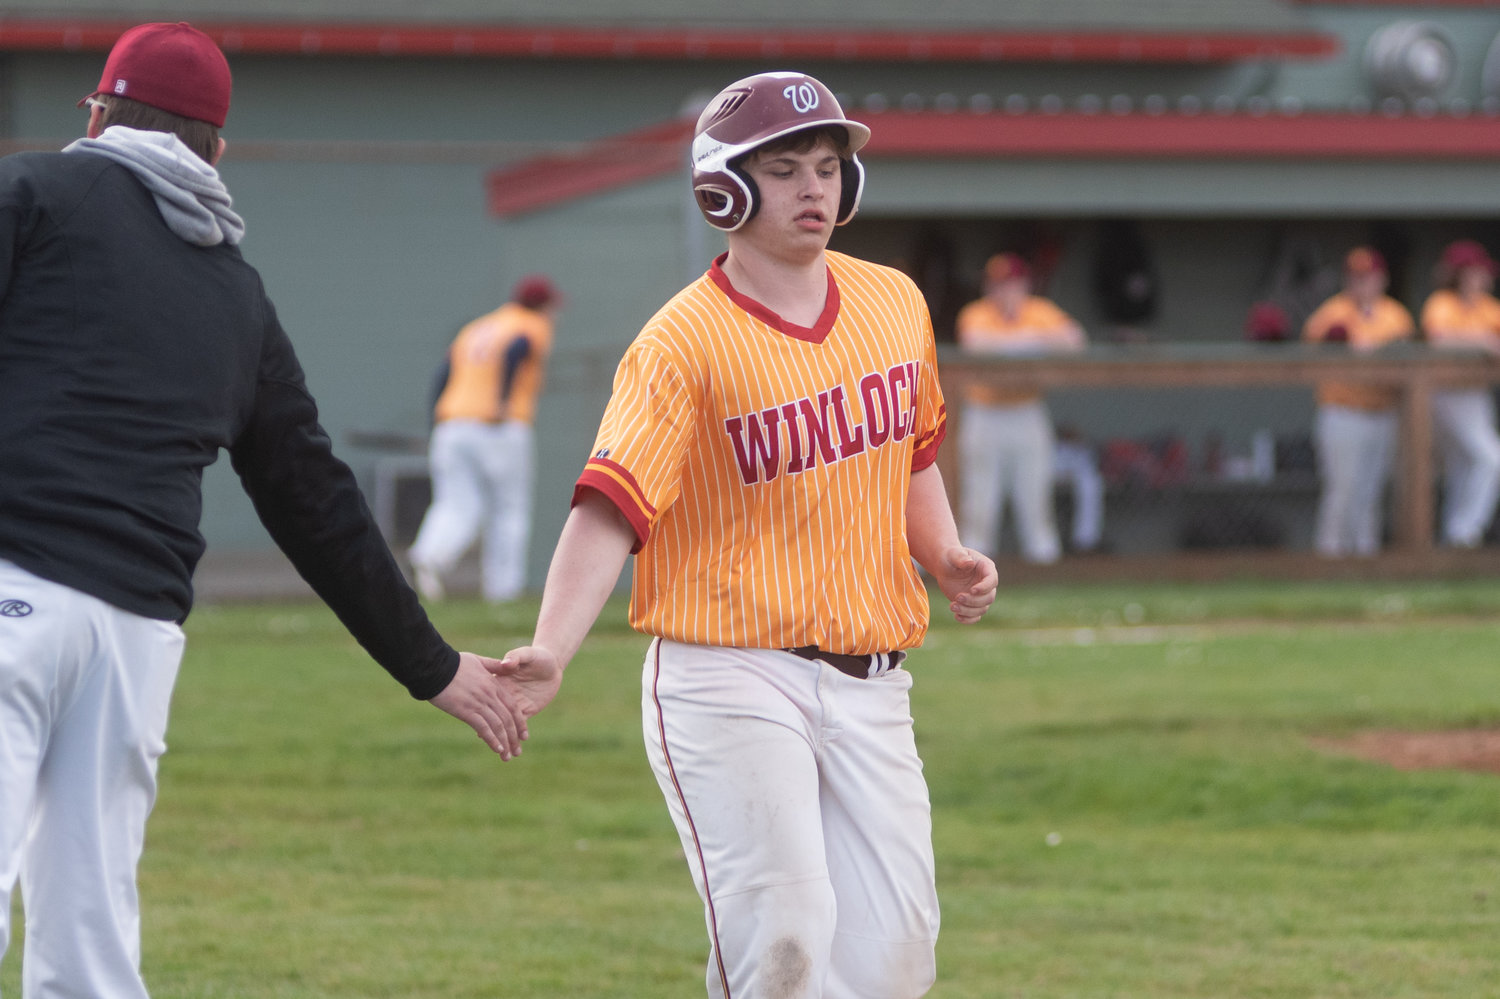 Winlock second baseman Cole Fray-Parmantier high-fives his coach after drawing a walk against Stevenson March 28.